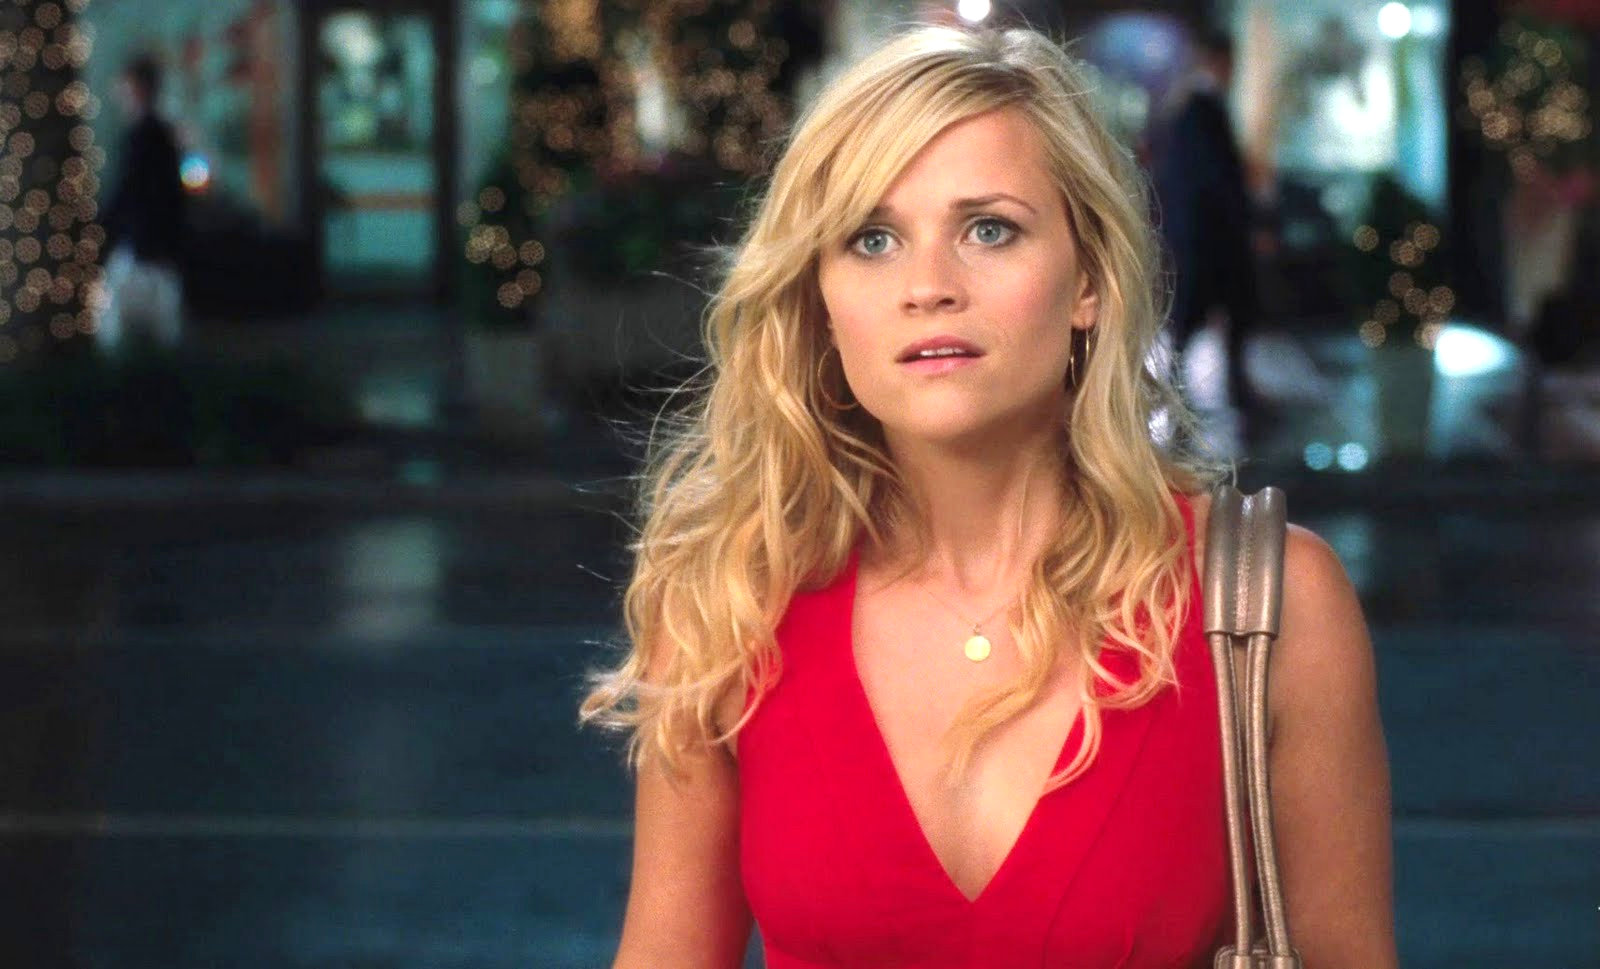 Reese Witherspoon stars as Lisa Jorgenson in Columbia Pictures' How Do You Know (2010)